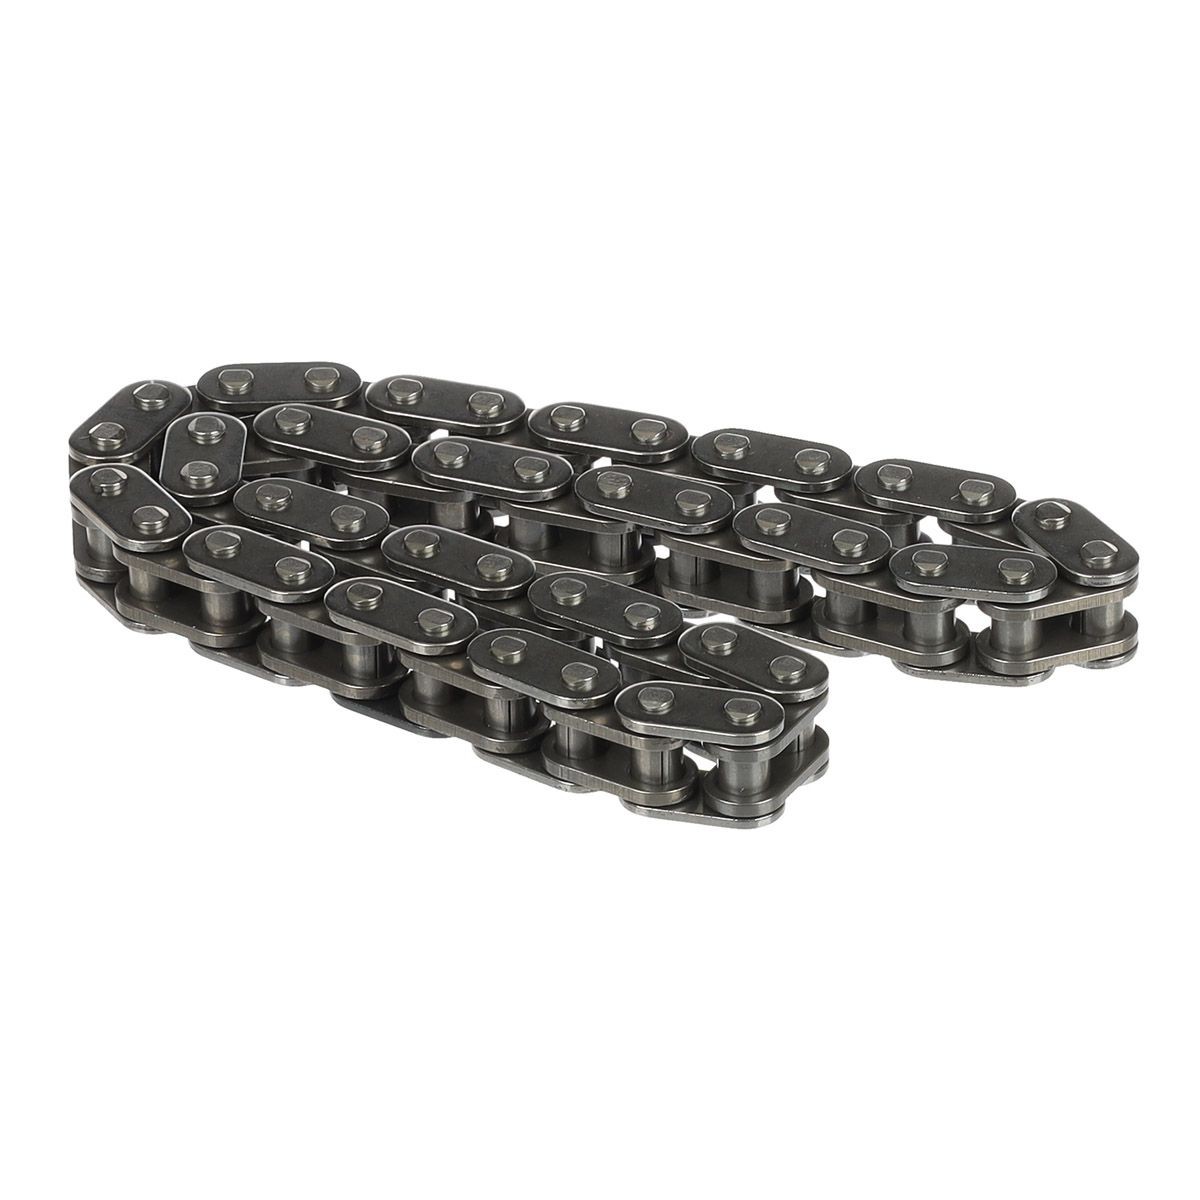 ET ENGINETEAM RS0109 Cam chain kit without gaskets/seals